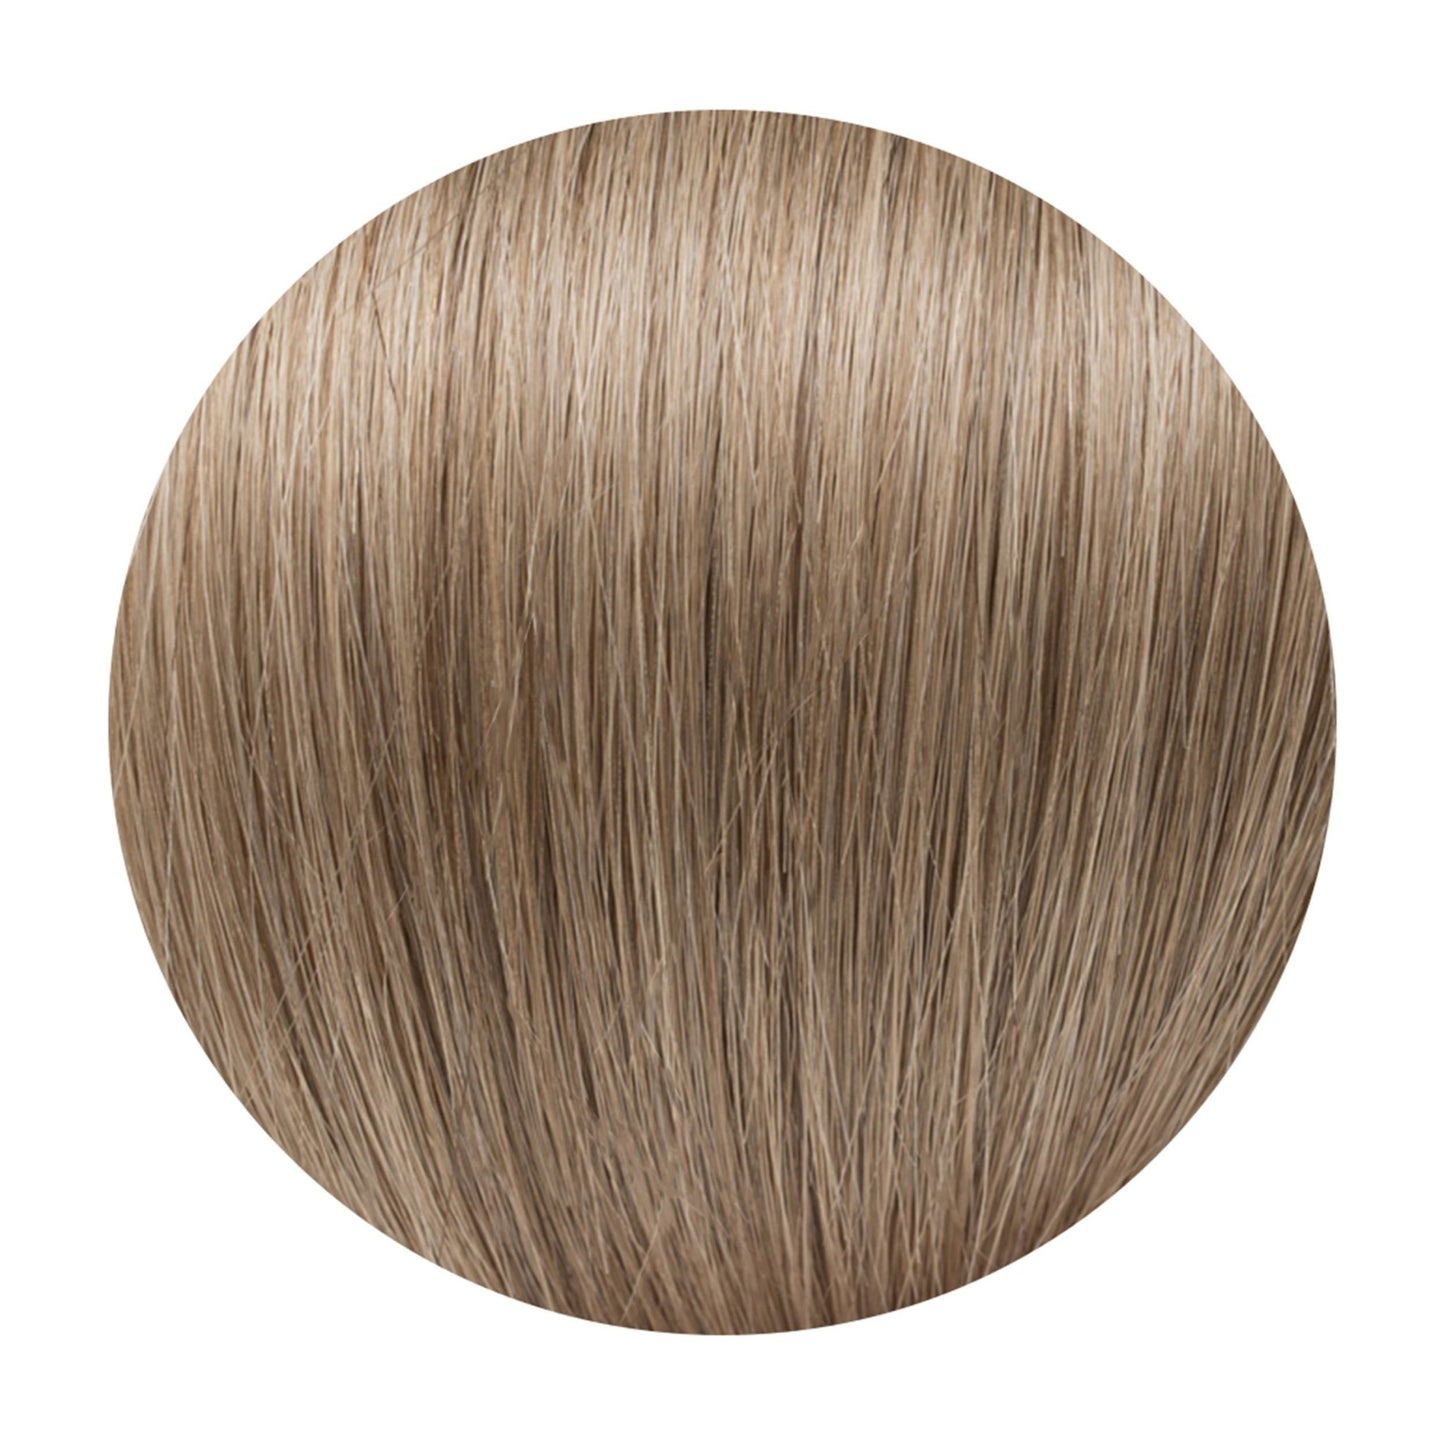 Seamless1 Sun Kissed Human Hair in 5 Piece - shelley and co